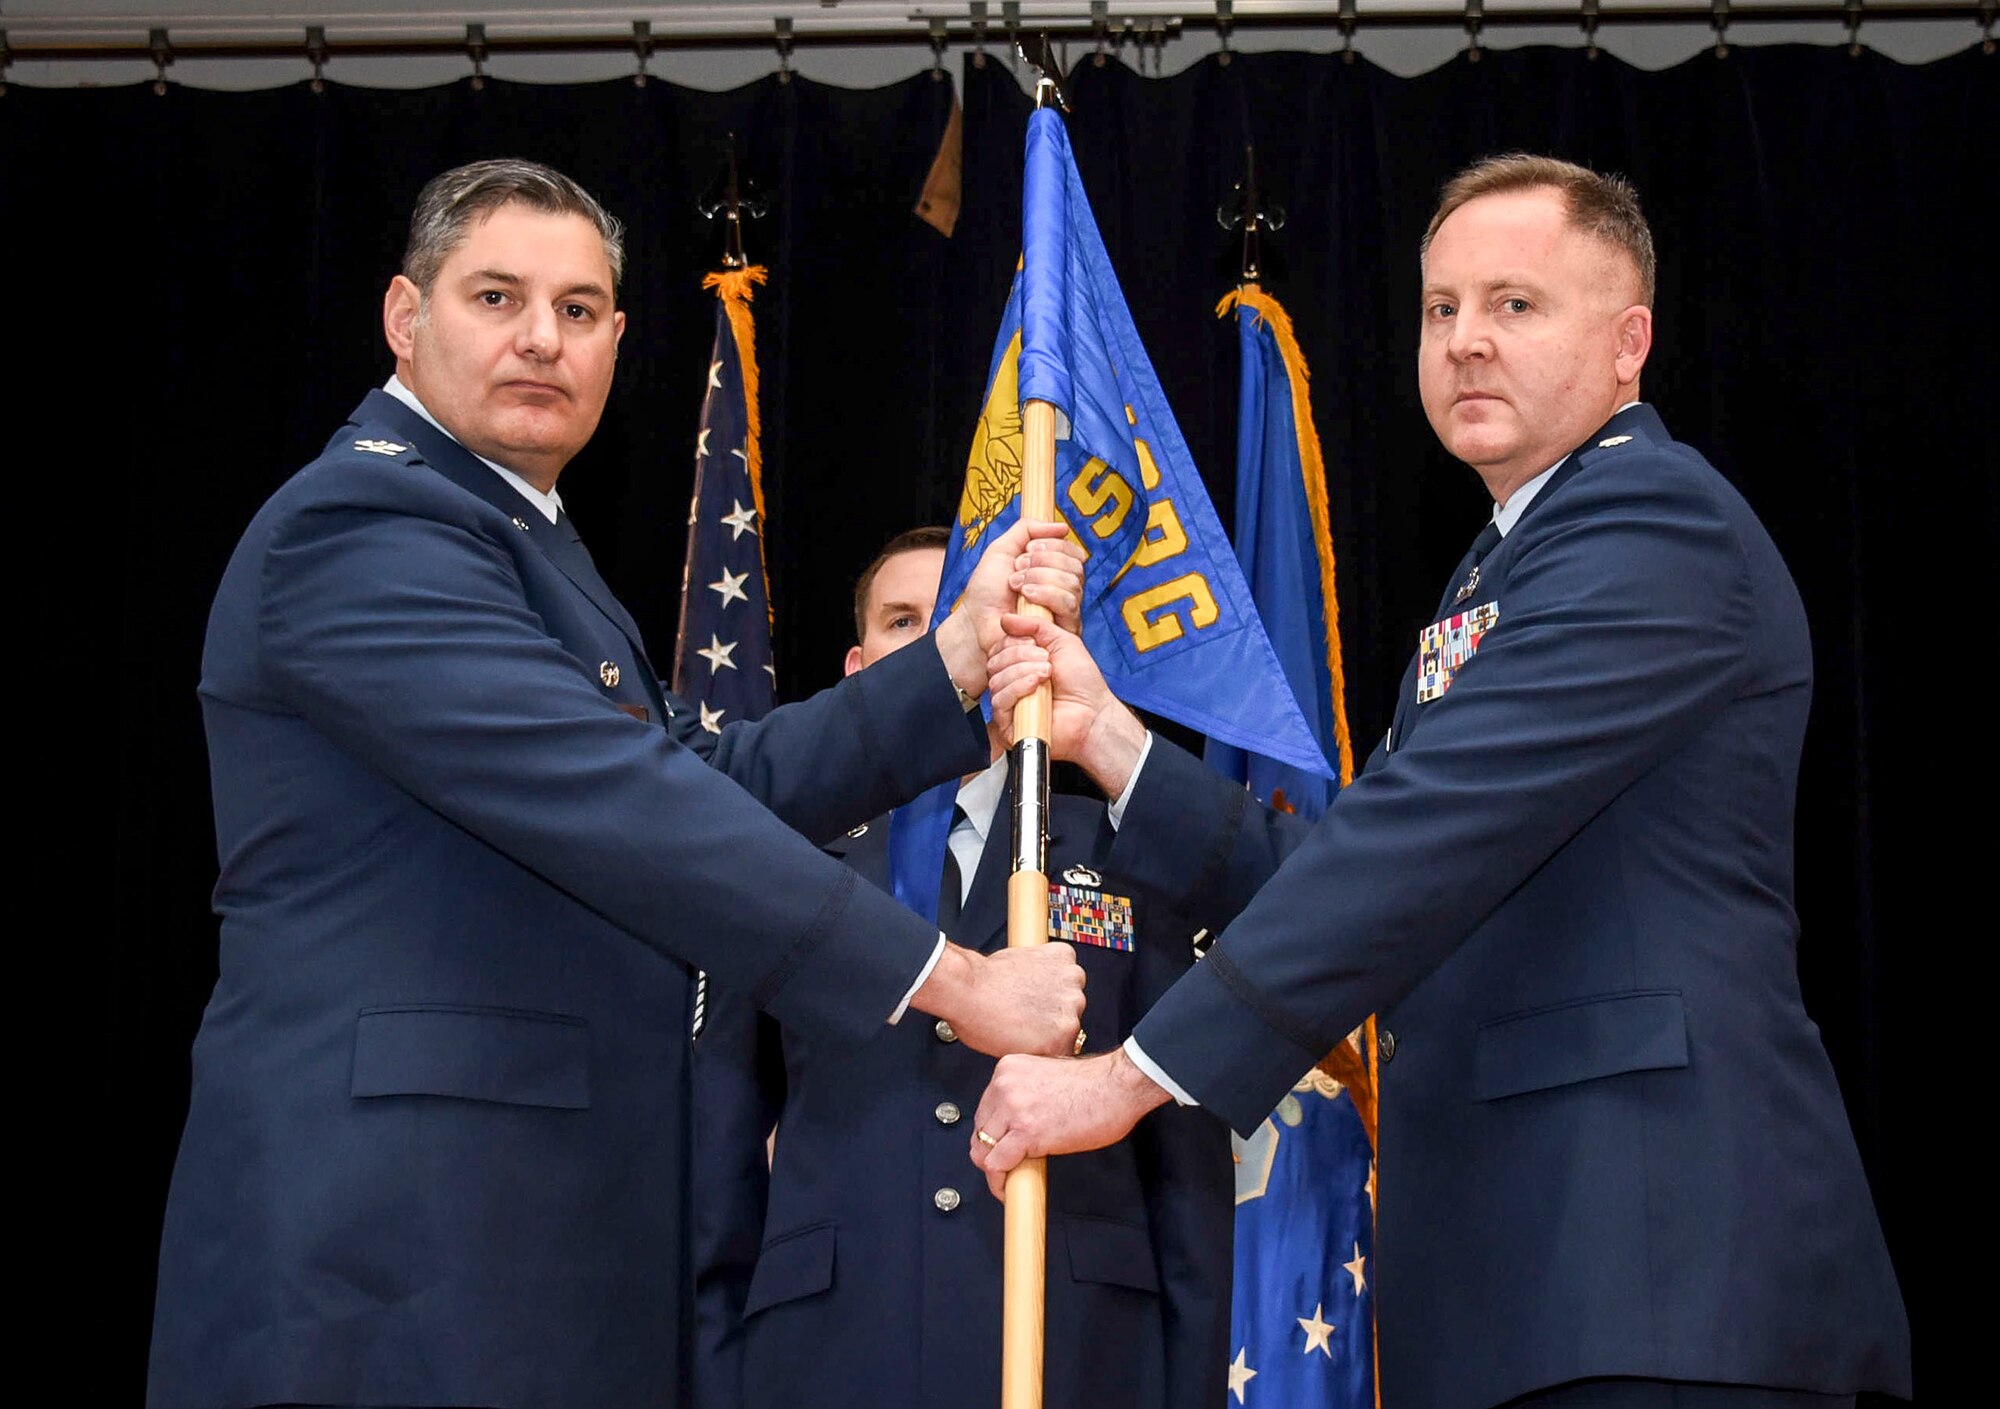 Col. John D. McKaye, 655th Intelligence, Surveillance and Reconnaissance Group commander, passes the guidon to Lt. Col. Jeffrey Derr, incoming 16th Intelligence Squadron commander, during a change of command ceremony March 10, 2018.